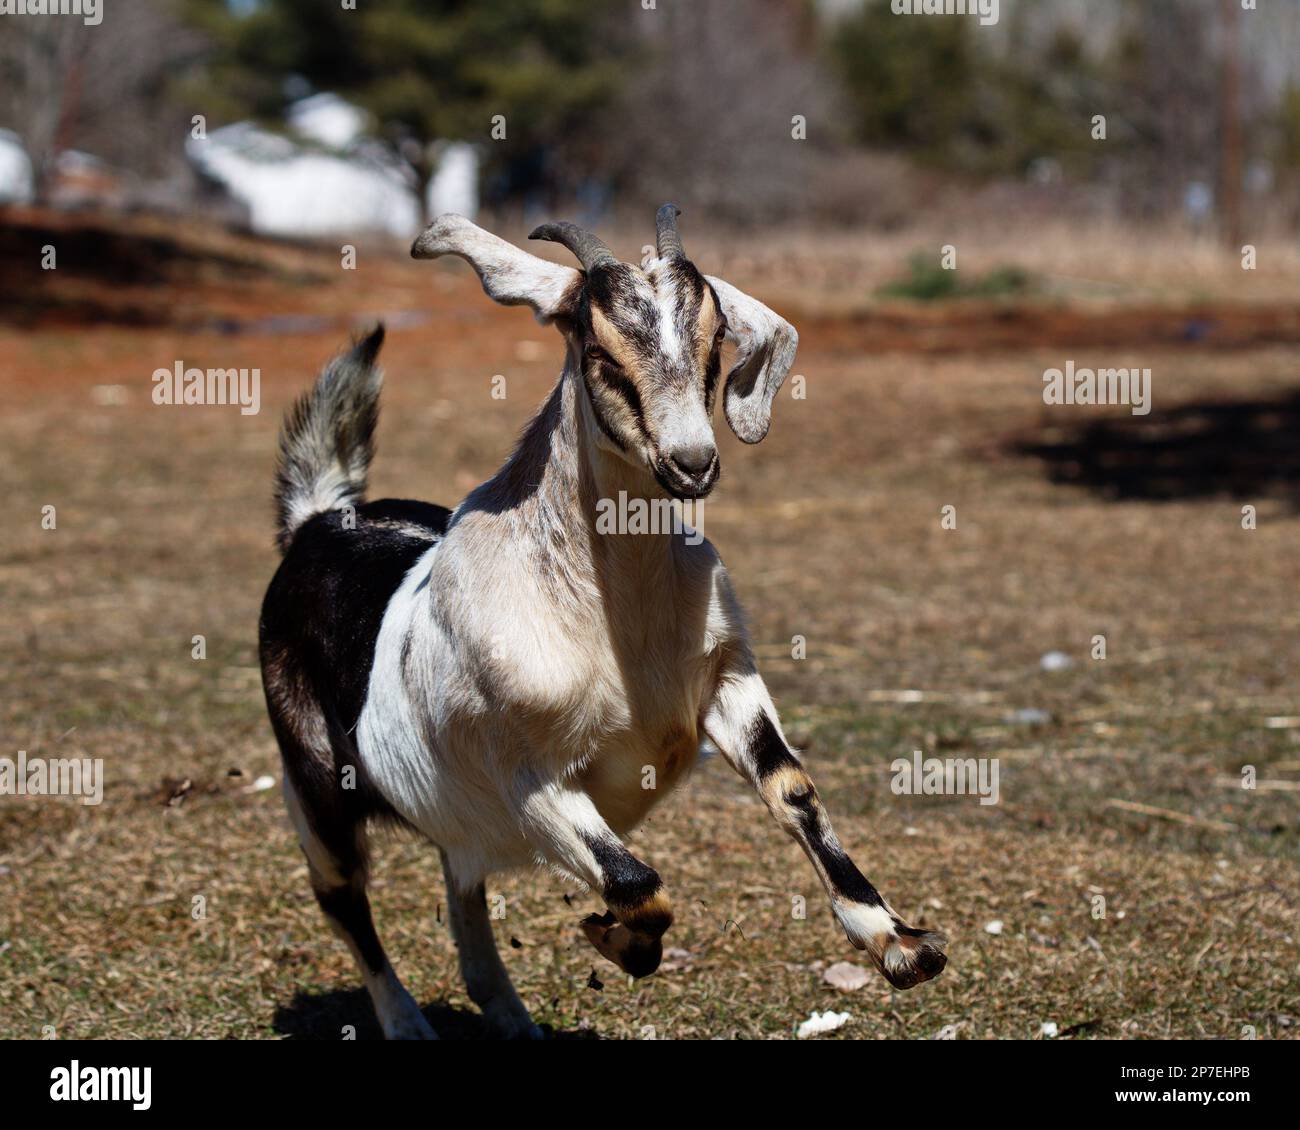 A black and white goat is captured running on a grassy terrain, showcasing its agility and strength Stock Photo